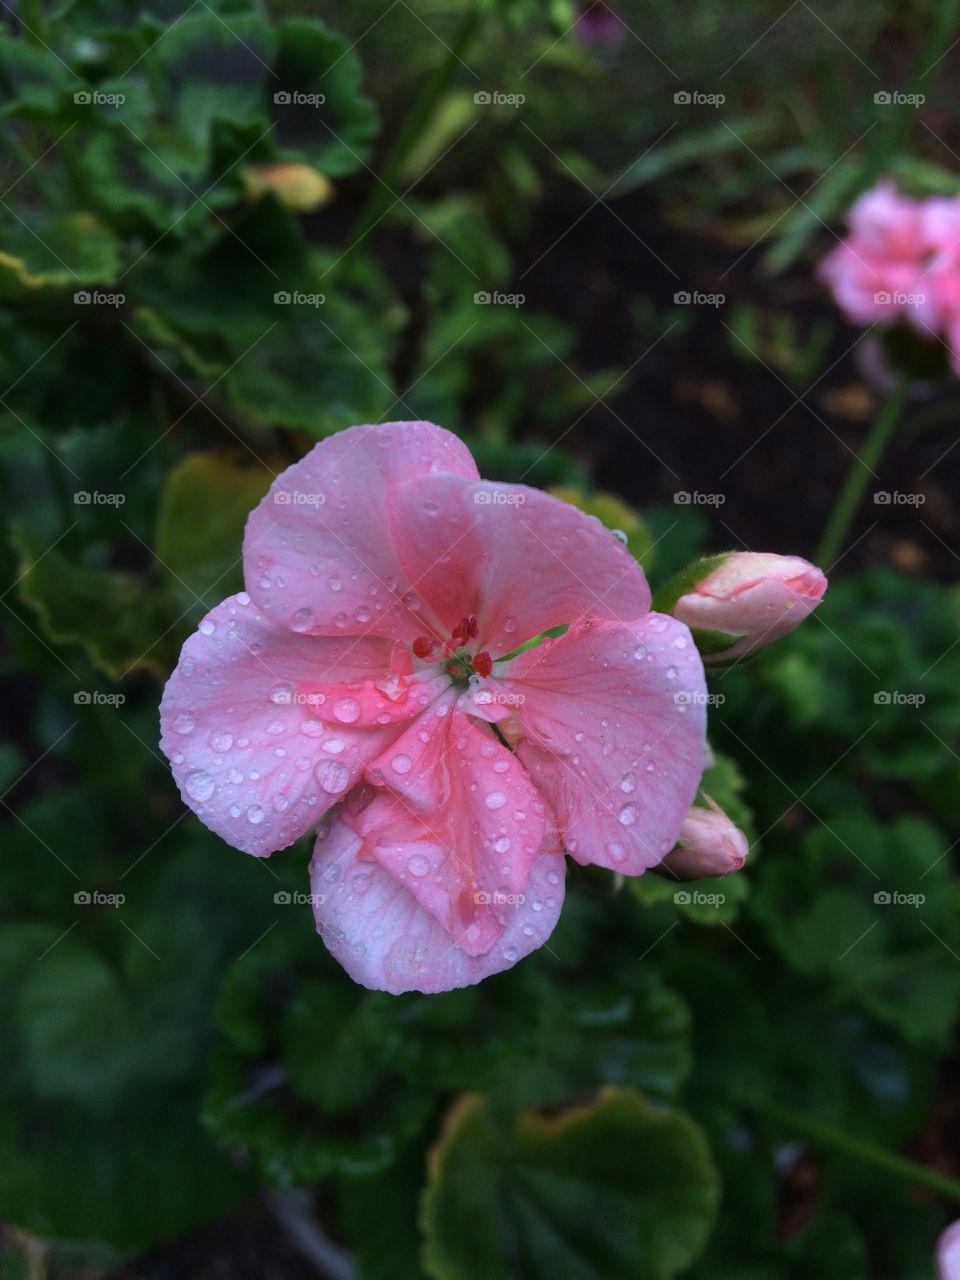 beautiful flower right after calming rain showers